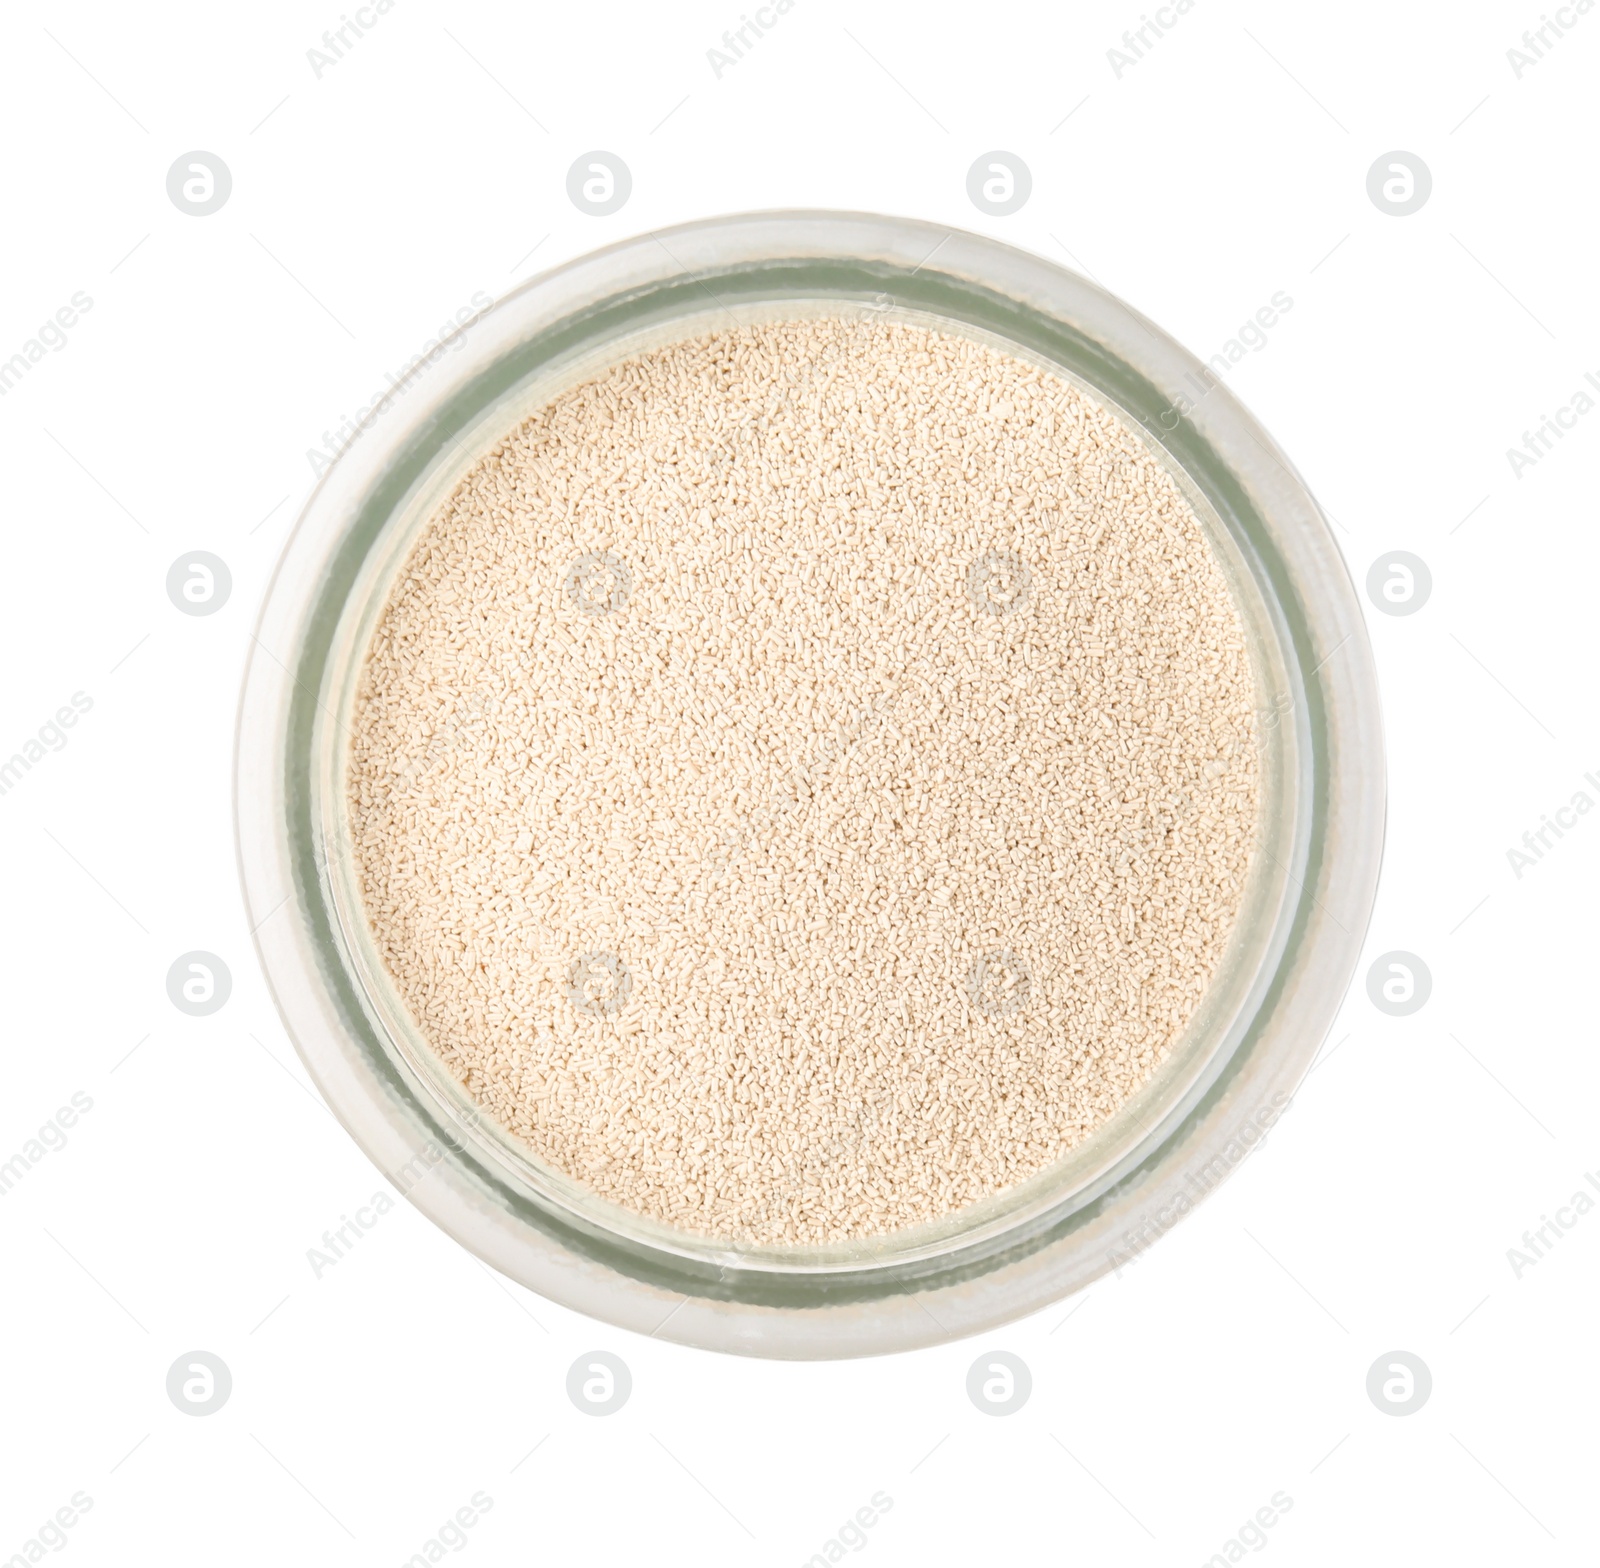 Photo of Granulated yeast in glass jar isolated on white, top view